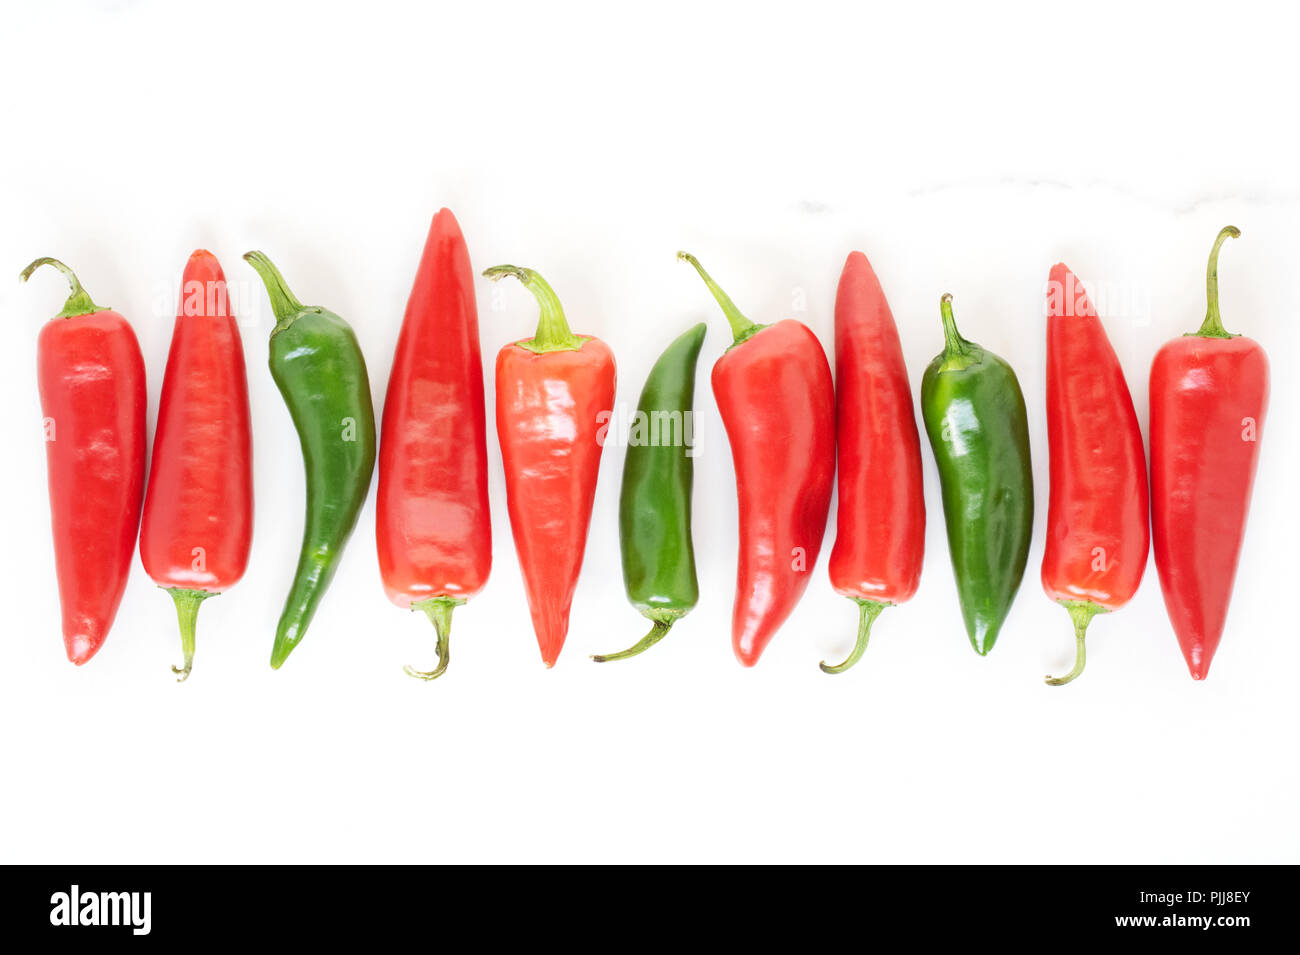 Capsicum annuum. A row of red and green chilli peppers. Stock Photo